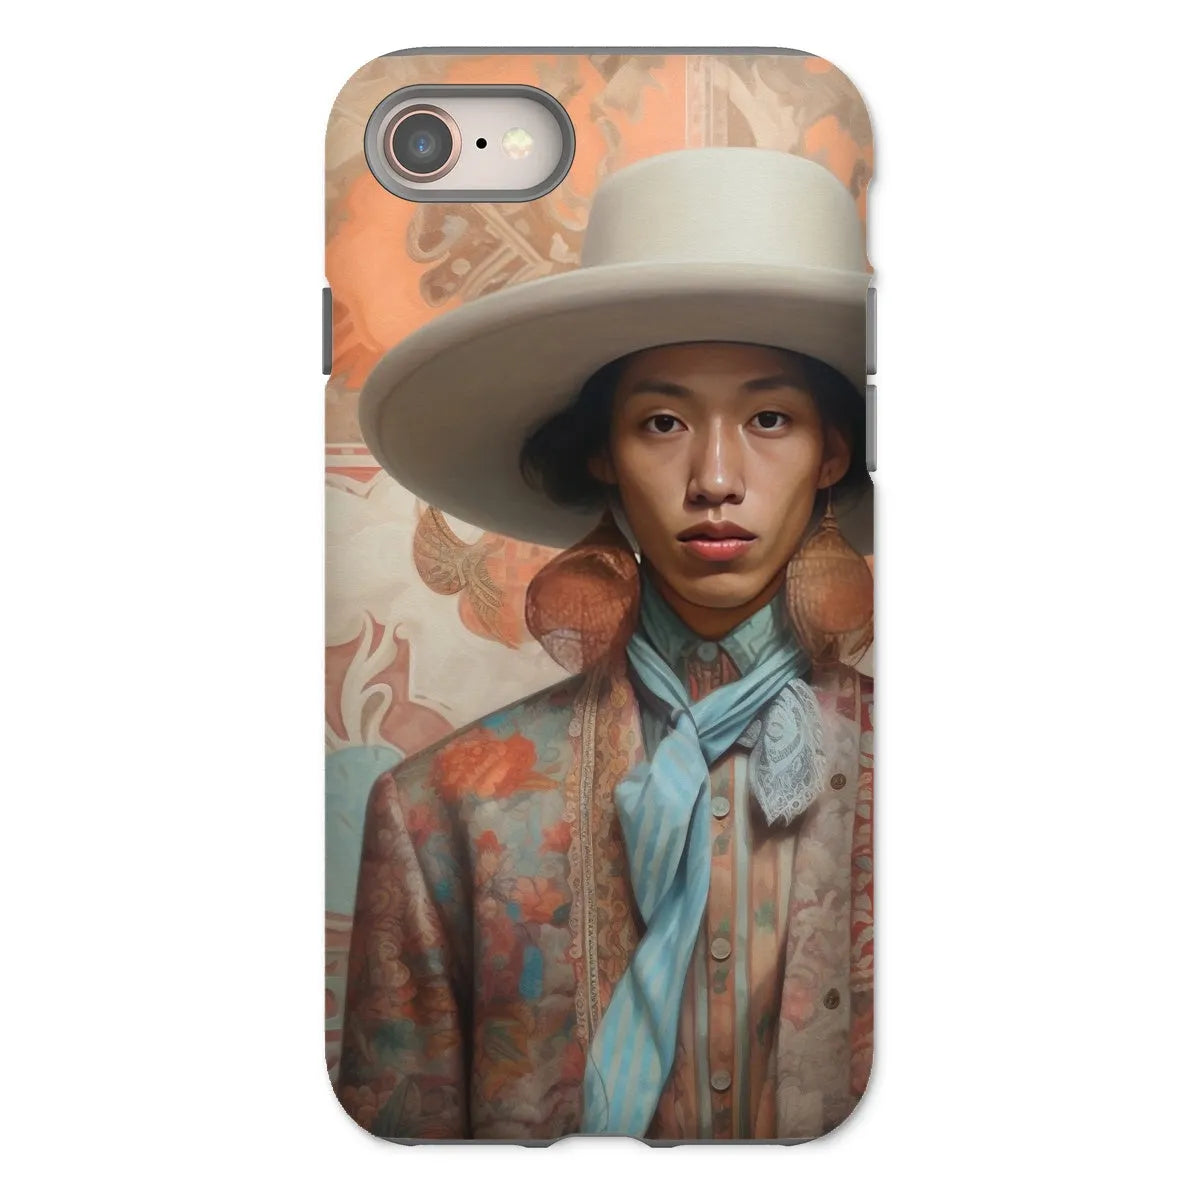 Iyaan - Gay Malay Asian Cowboy Aesthetic Art Phone Case - Iphone 8 / Matte - Mobile Phone Cases - Aesthetic Art